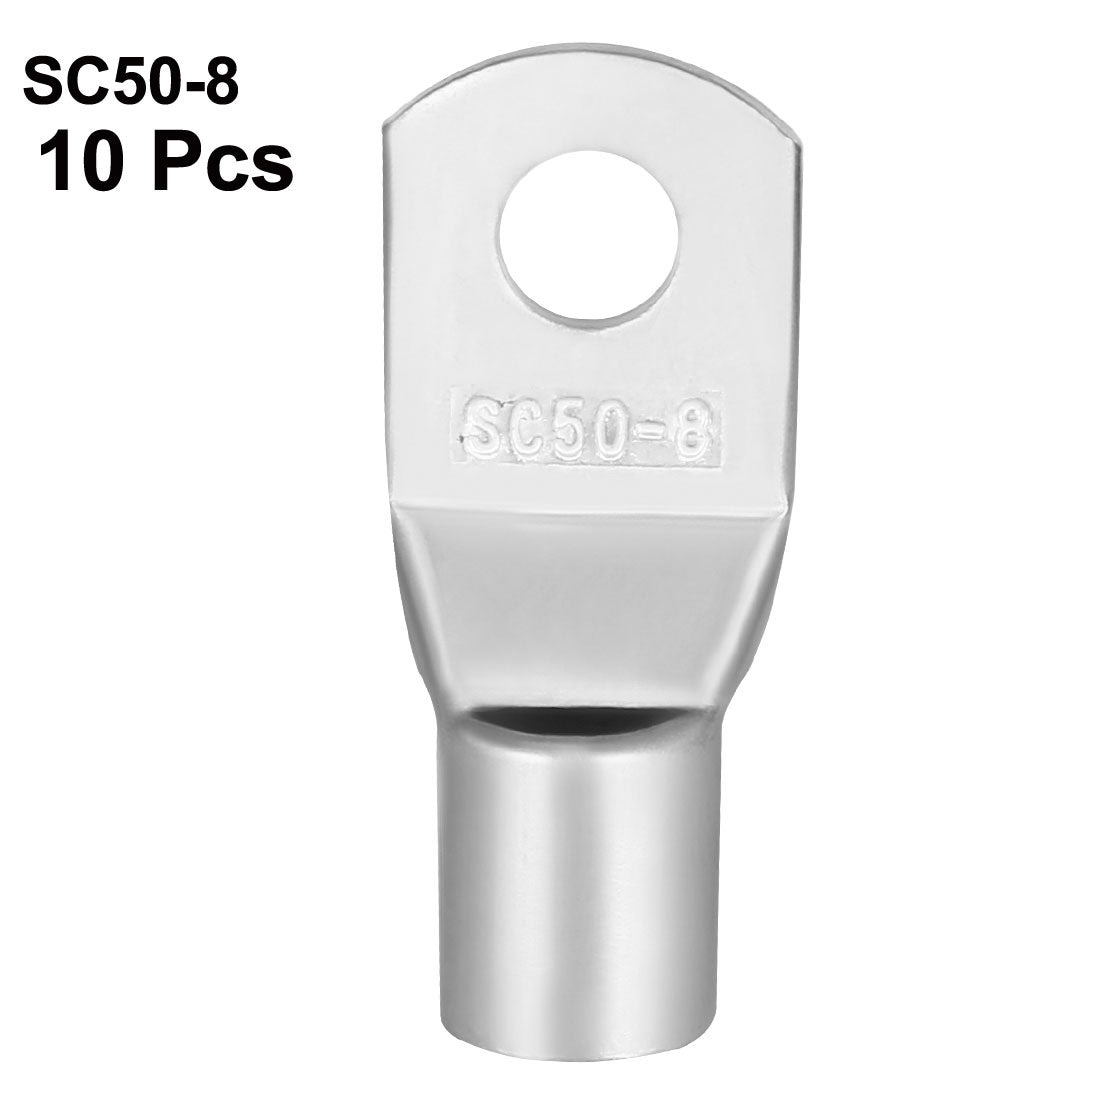 uxcell Uxcell 10PCS SC50-8 Copper Eyelets Tubular Lug Ring Terminal Connectors